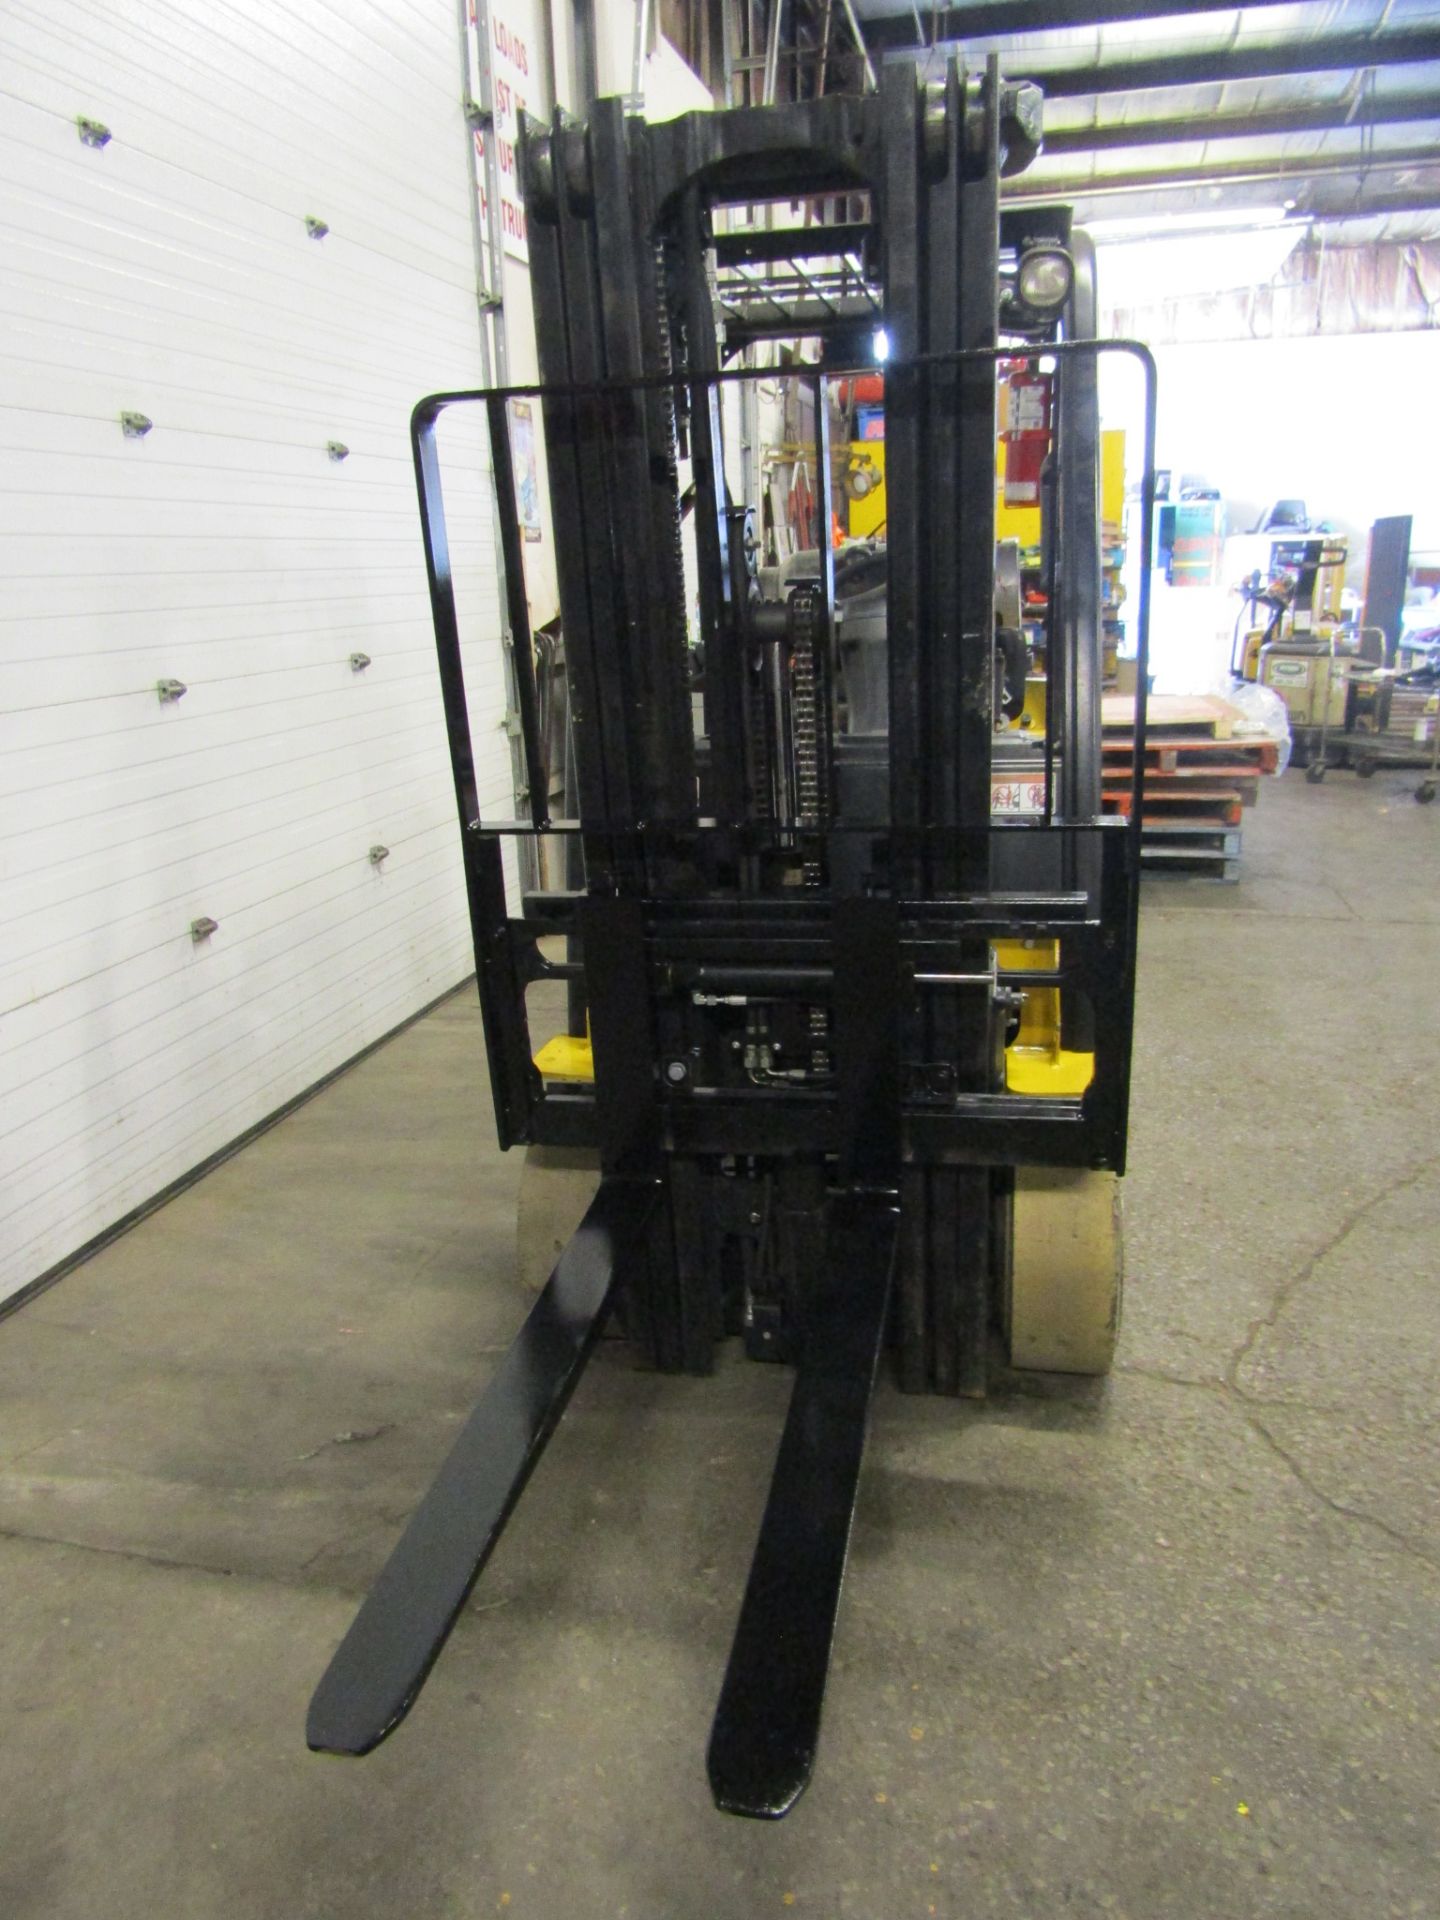 2013 Yale 5000lbs Capacity Forklift with 3-stage mast - LPG (propane) with sideshift (no propane - Image 2 of 2